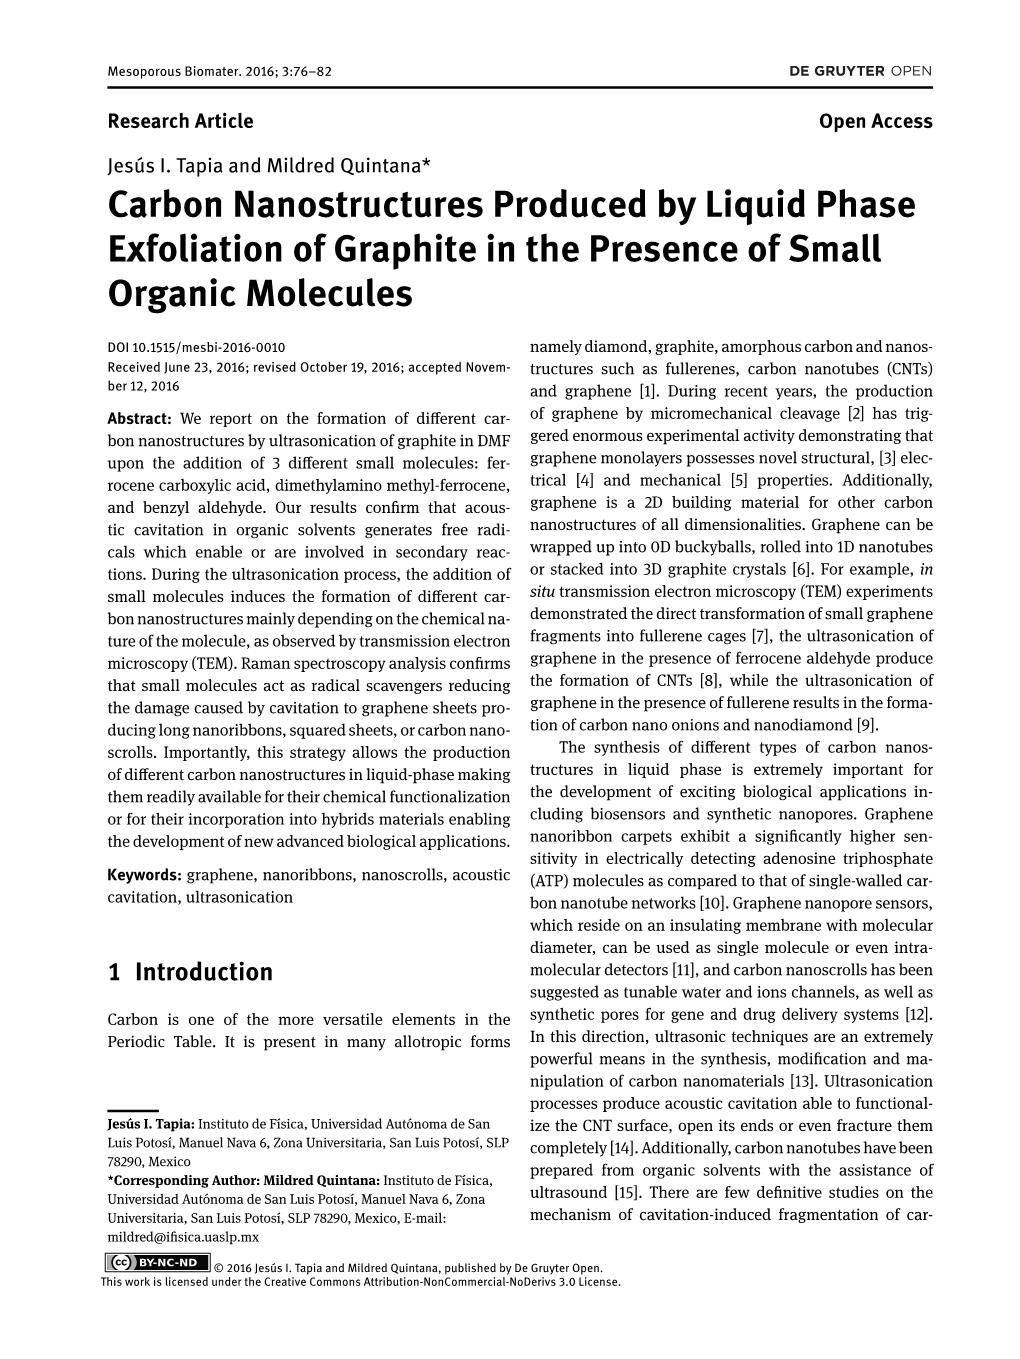 Carbon Nanostructures Produced by Liquid Phase Exfoliation of Graphite in the Presence of Small Organic Molecules